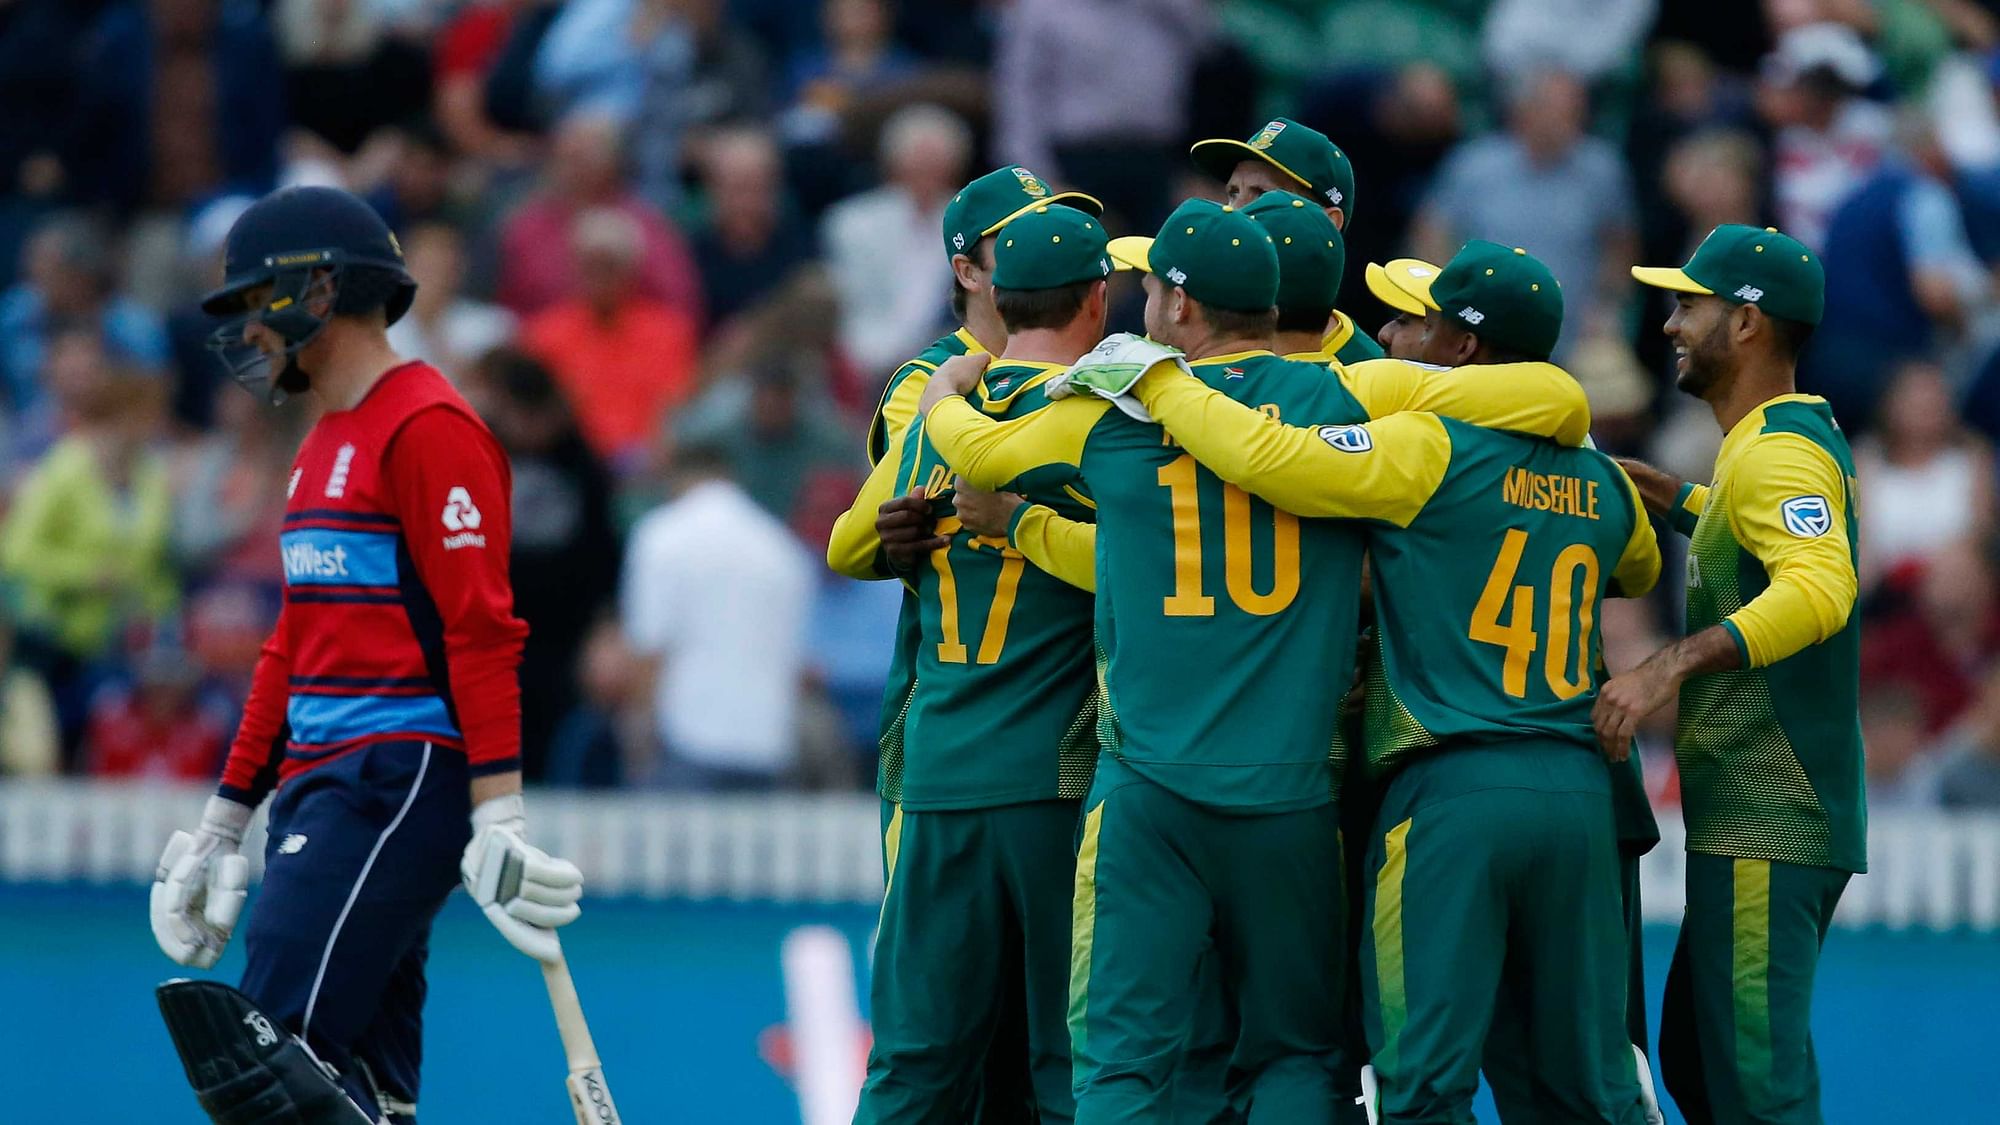 South Africa celebrate at the end of  the second NatWest T20 Blast match at the Cooper Associates County Ground, Taunton. (Photo: AP)